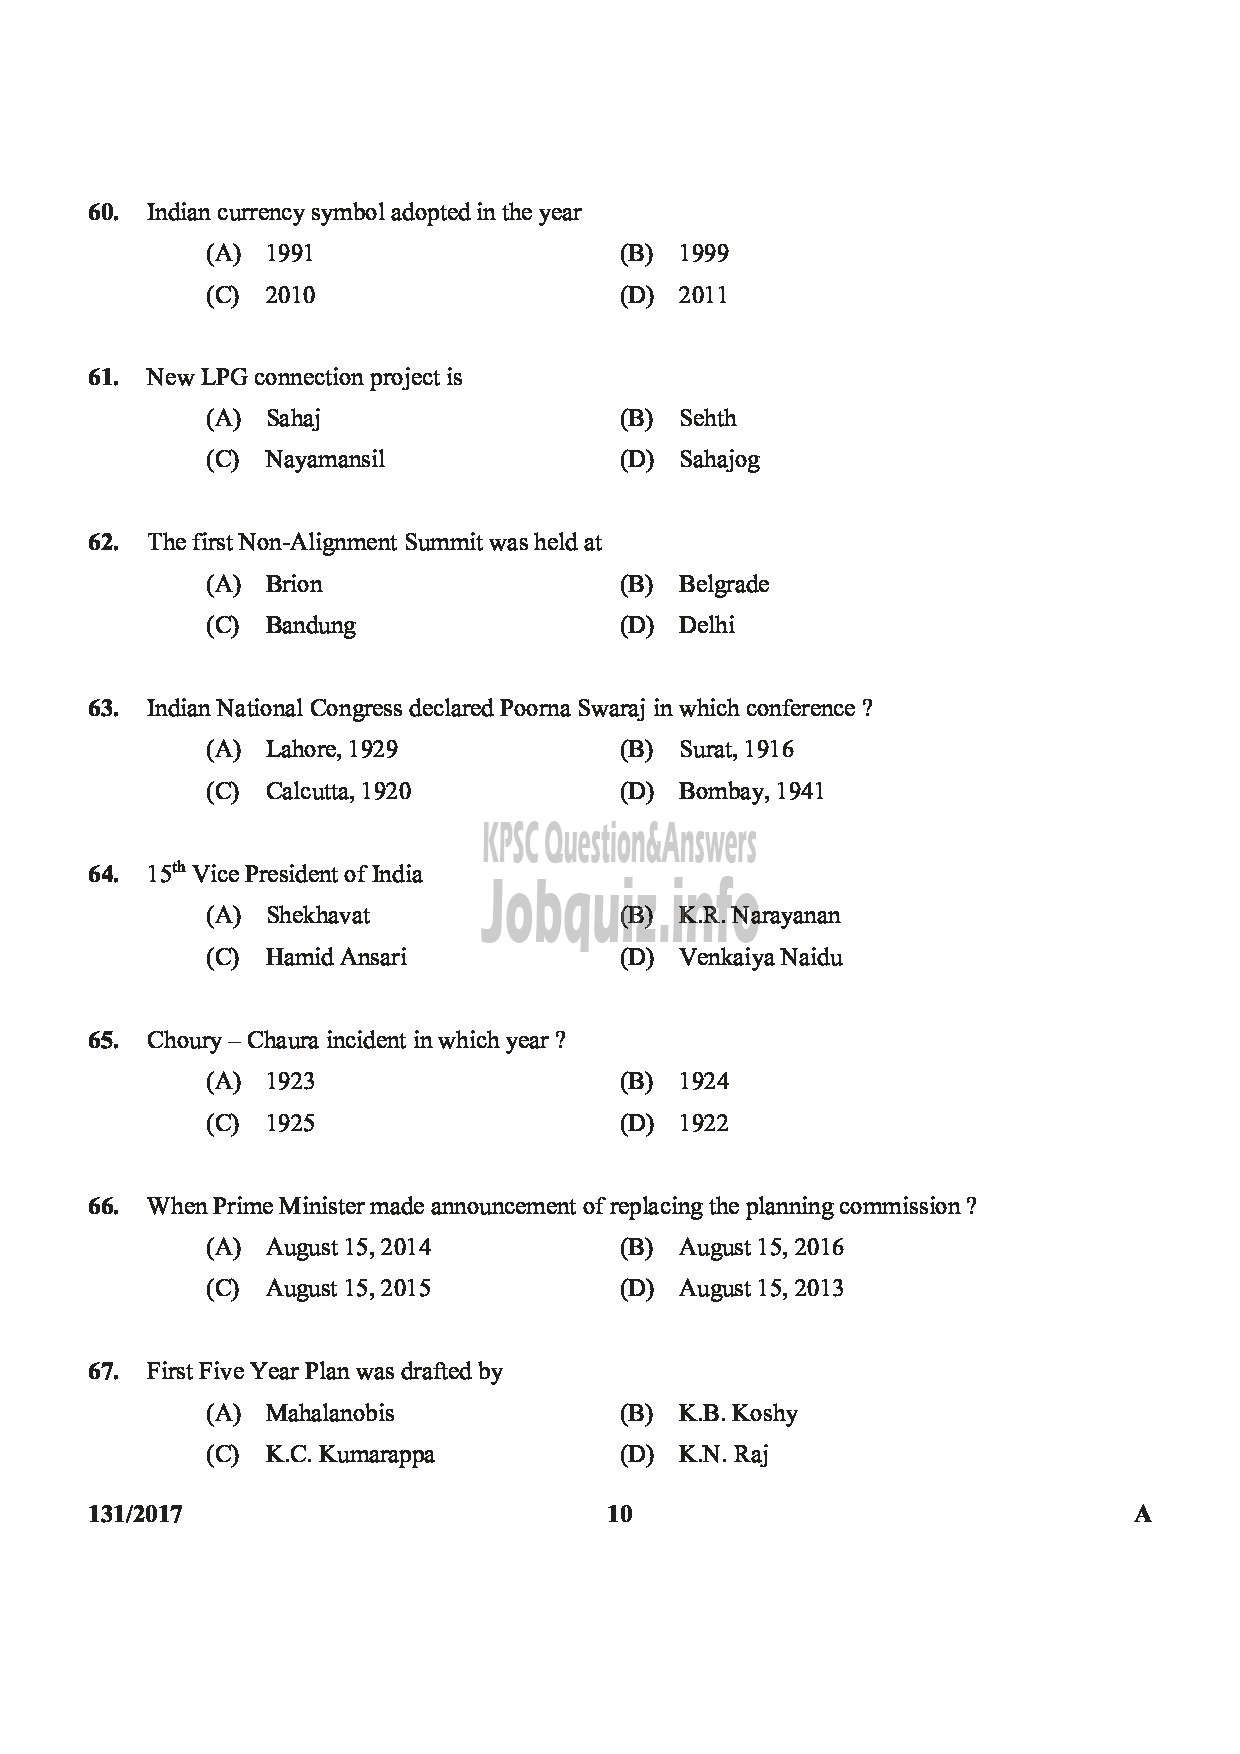 Kerala PSC Question Paper - FIREMAN DRIVER CUM PUMP OPERATOR TRAINEE SR FROM AMONG SC/ST ONLY FIRE AND RESCUE SERVICE-10